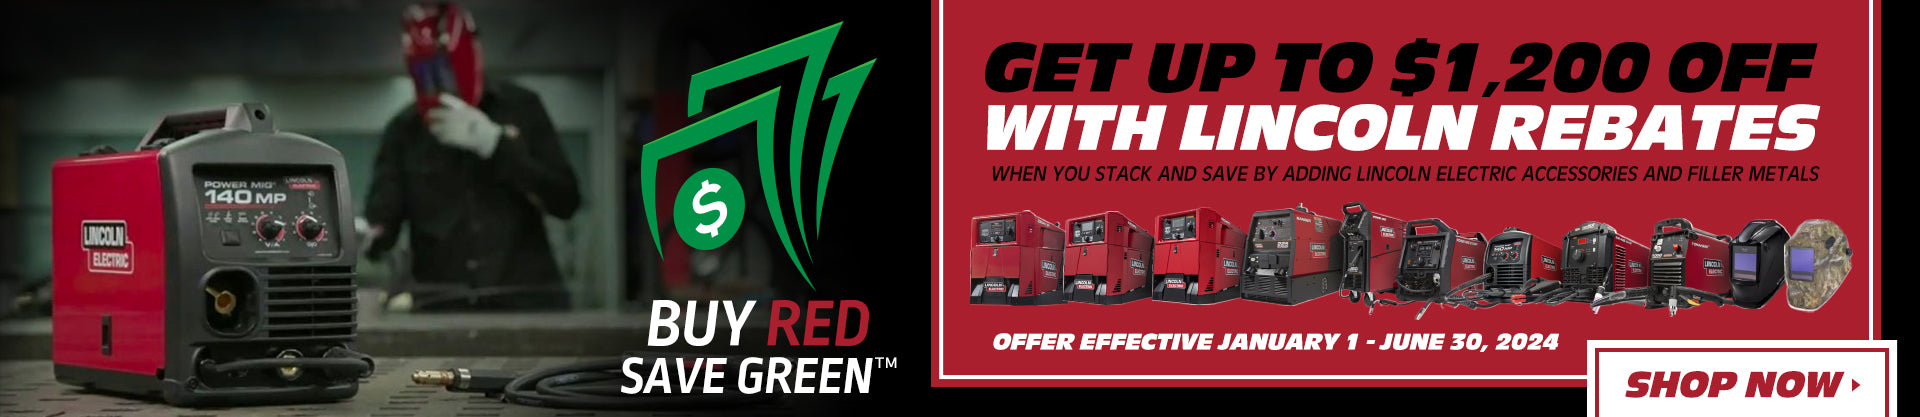 Lincoln's Buy Red, Save Green Promotion. Offer ends June 30, 2024.